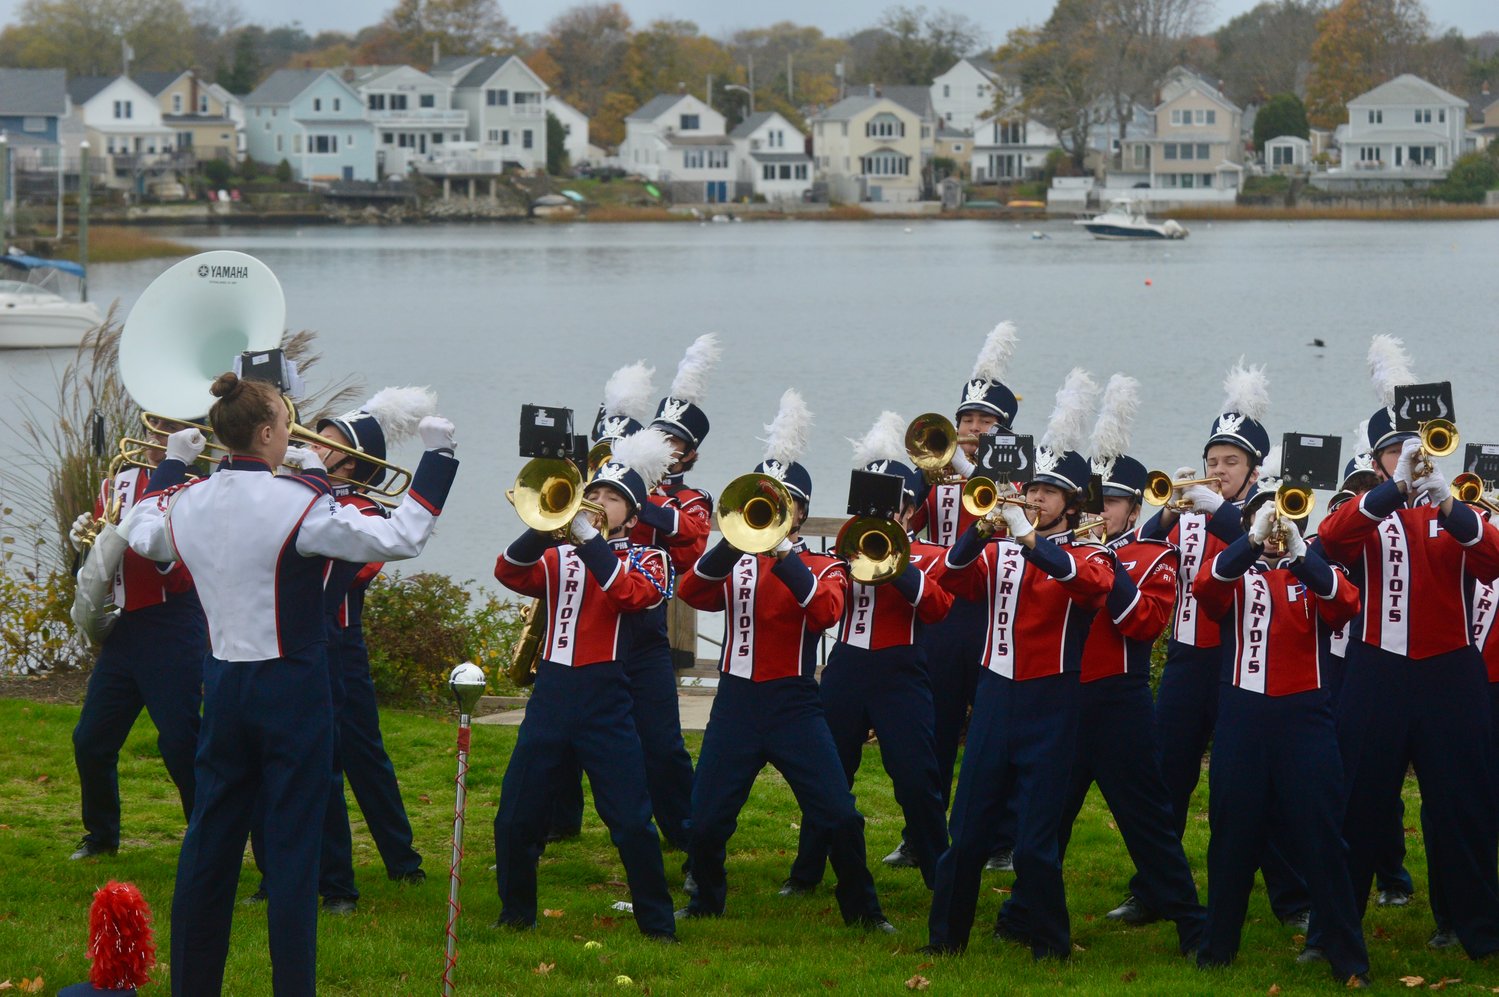 Band members perform for veterans on the Thrive Coffee House lawn overlooking Blue Bill Cove.